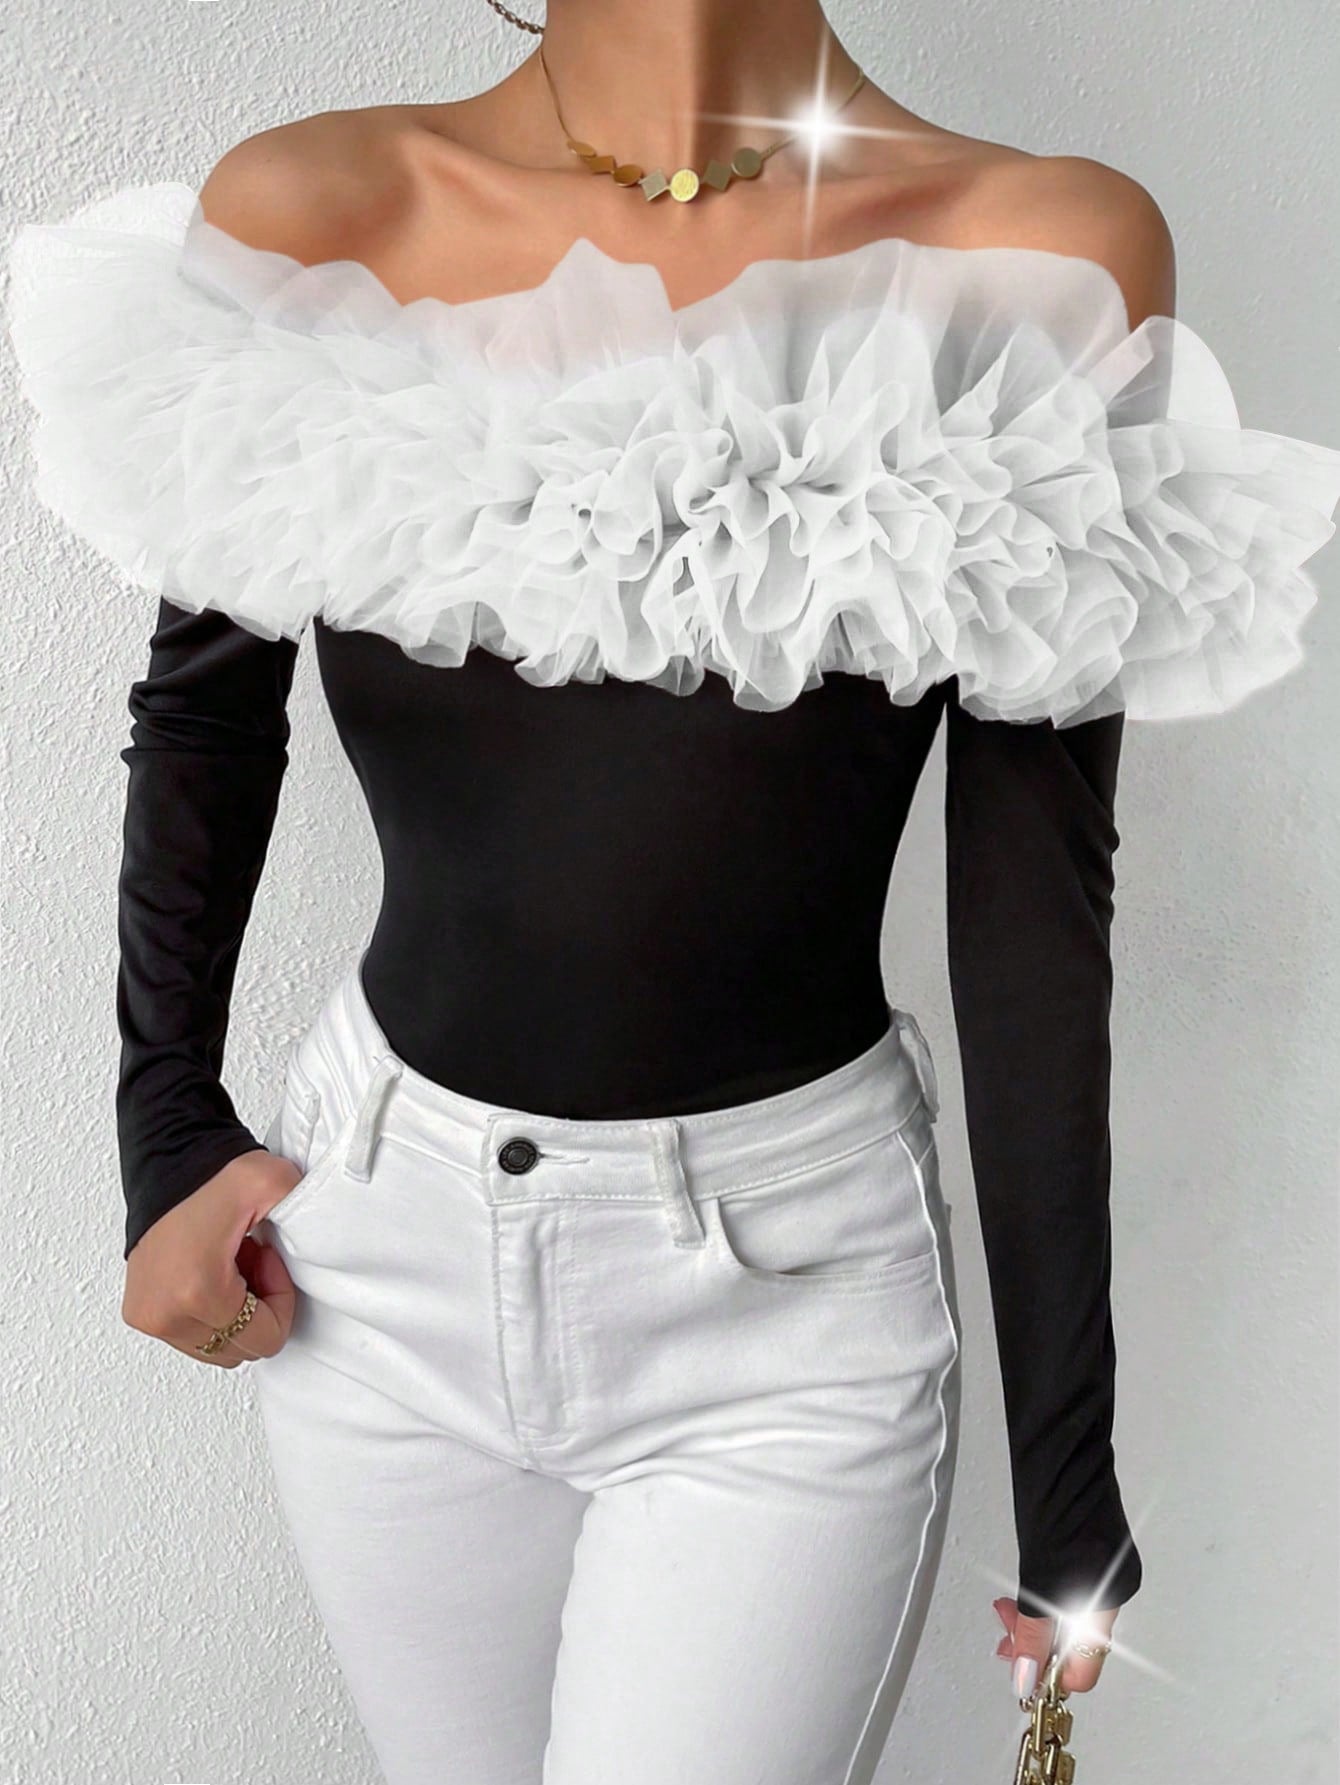 BAE Contrast Mesh Exaggerated Ruffle Off Shoulder Bodysuit